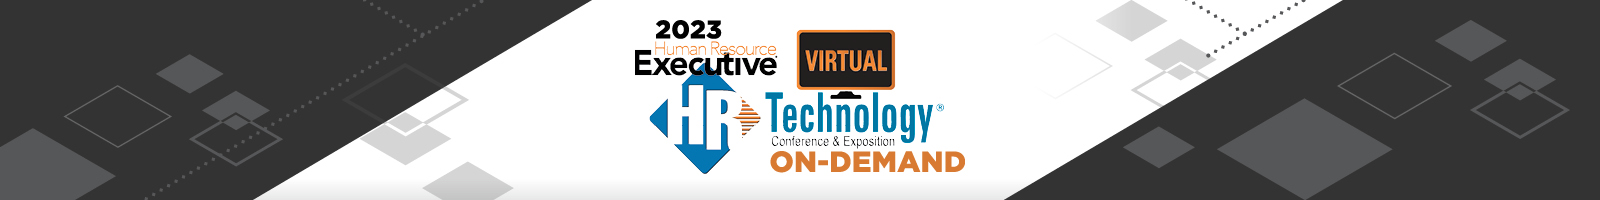 HR Tech Virtual February 28 - March 3, 2023 | A FREE Interactive Online Event